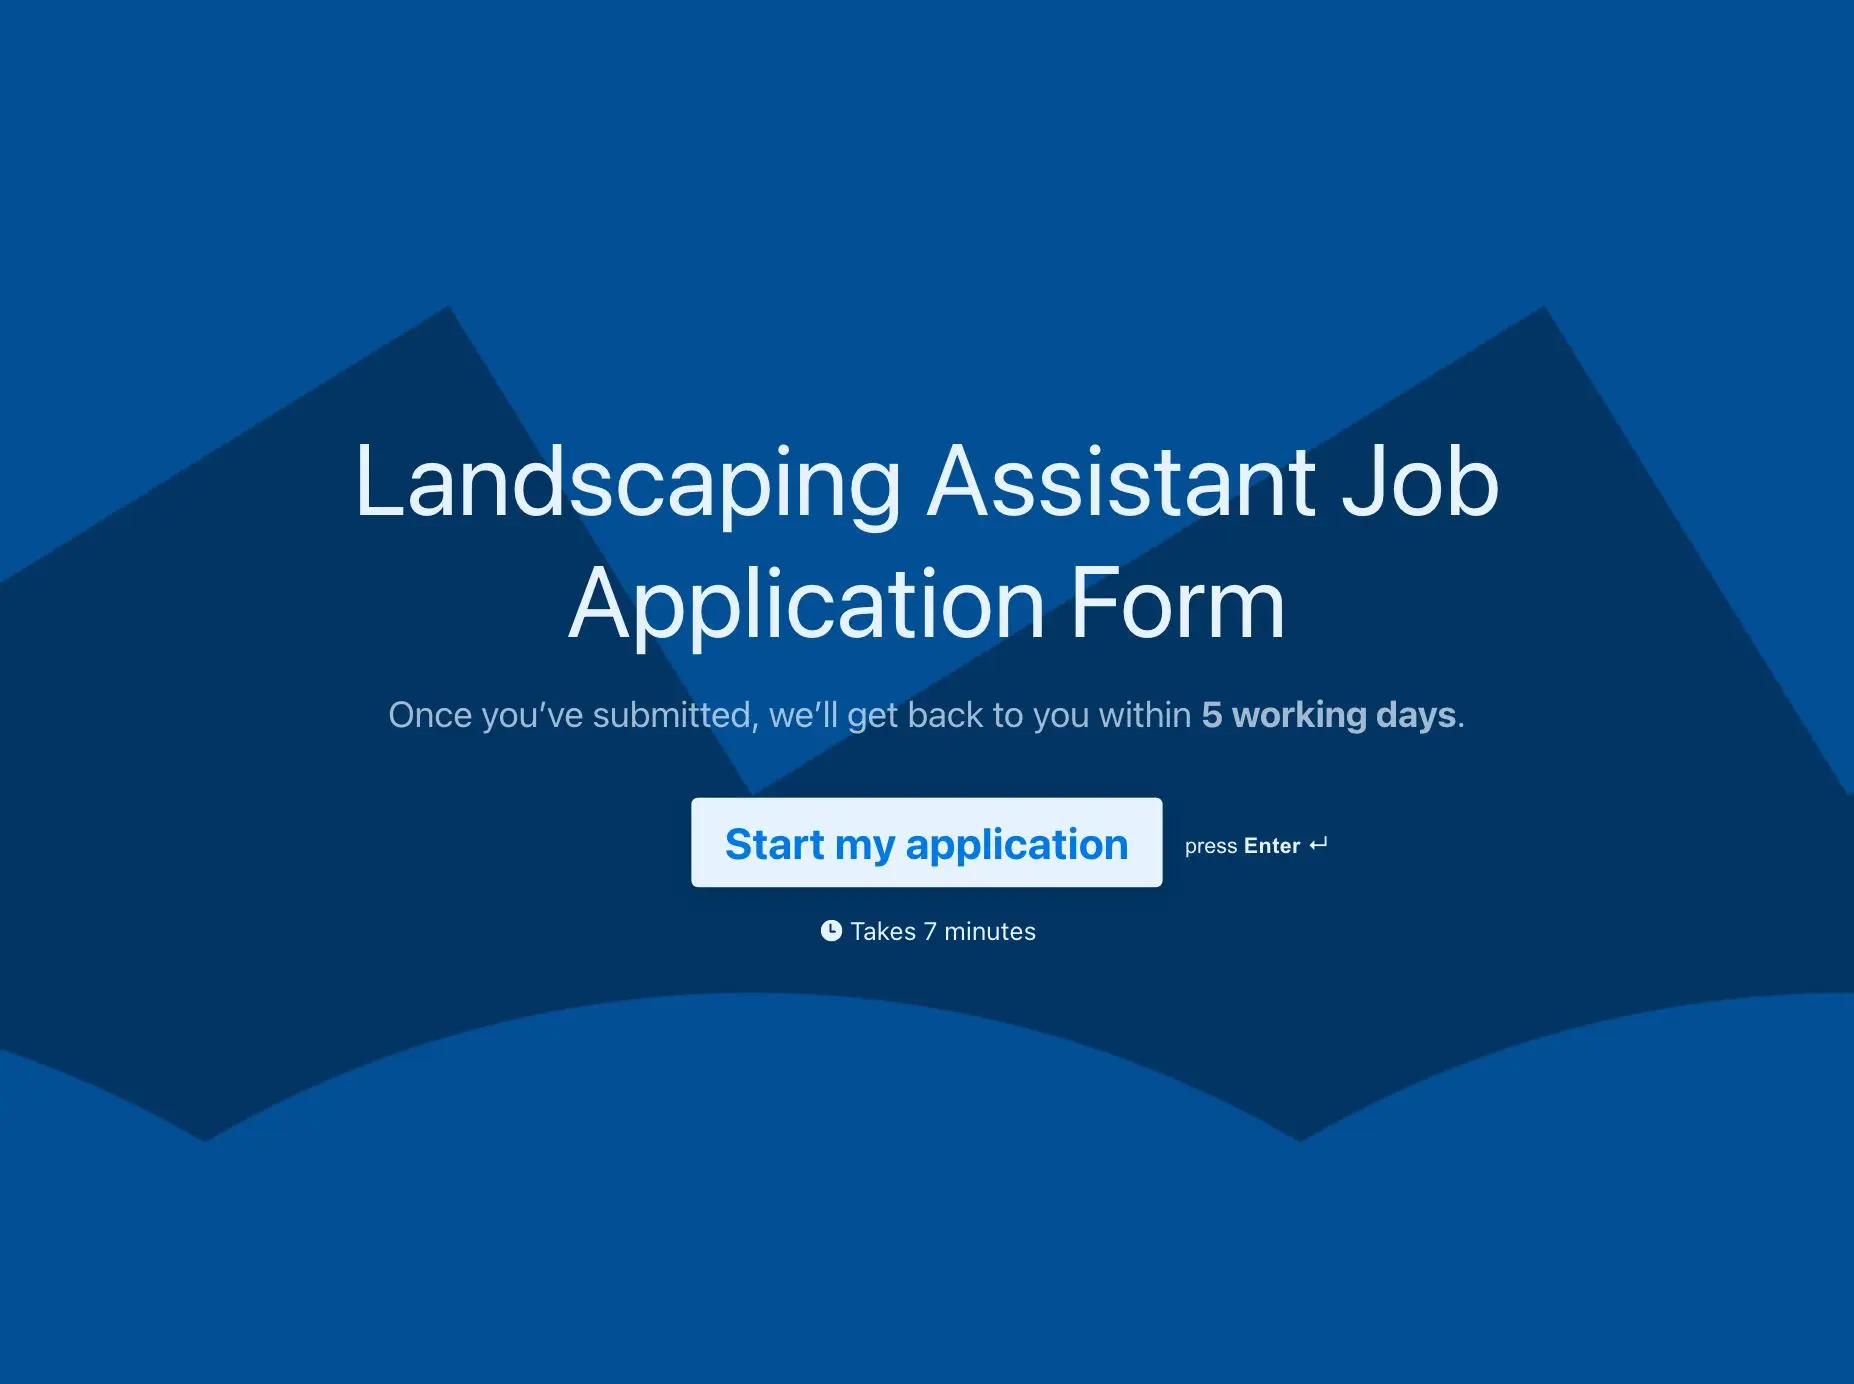 Landscaping Assistant Job Application Form Template Hero